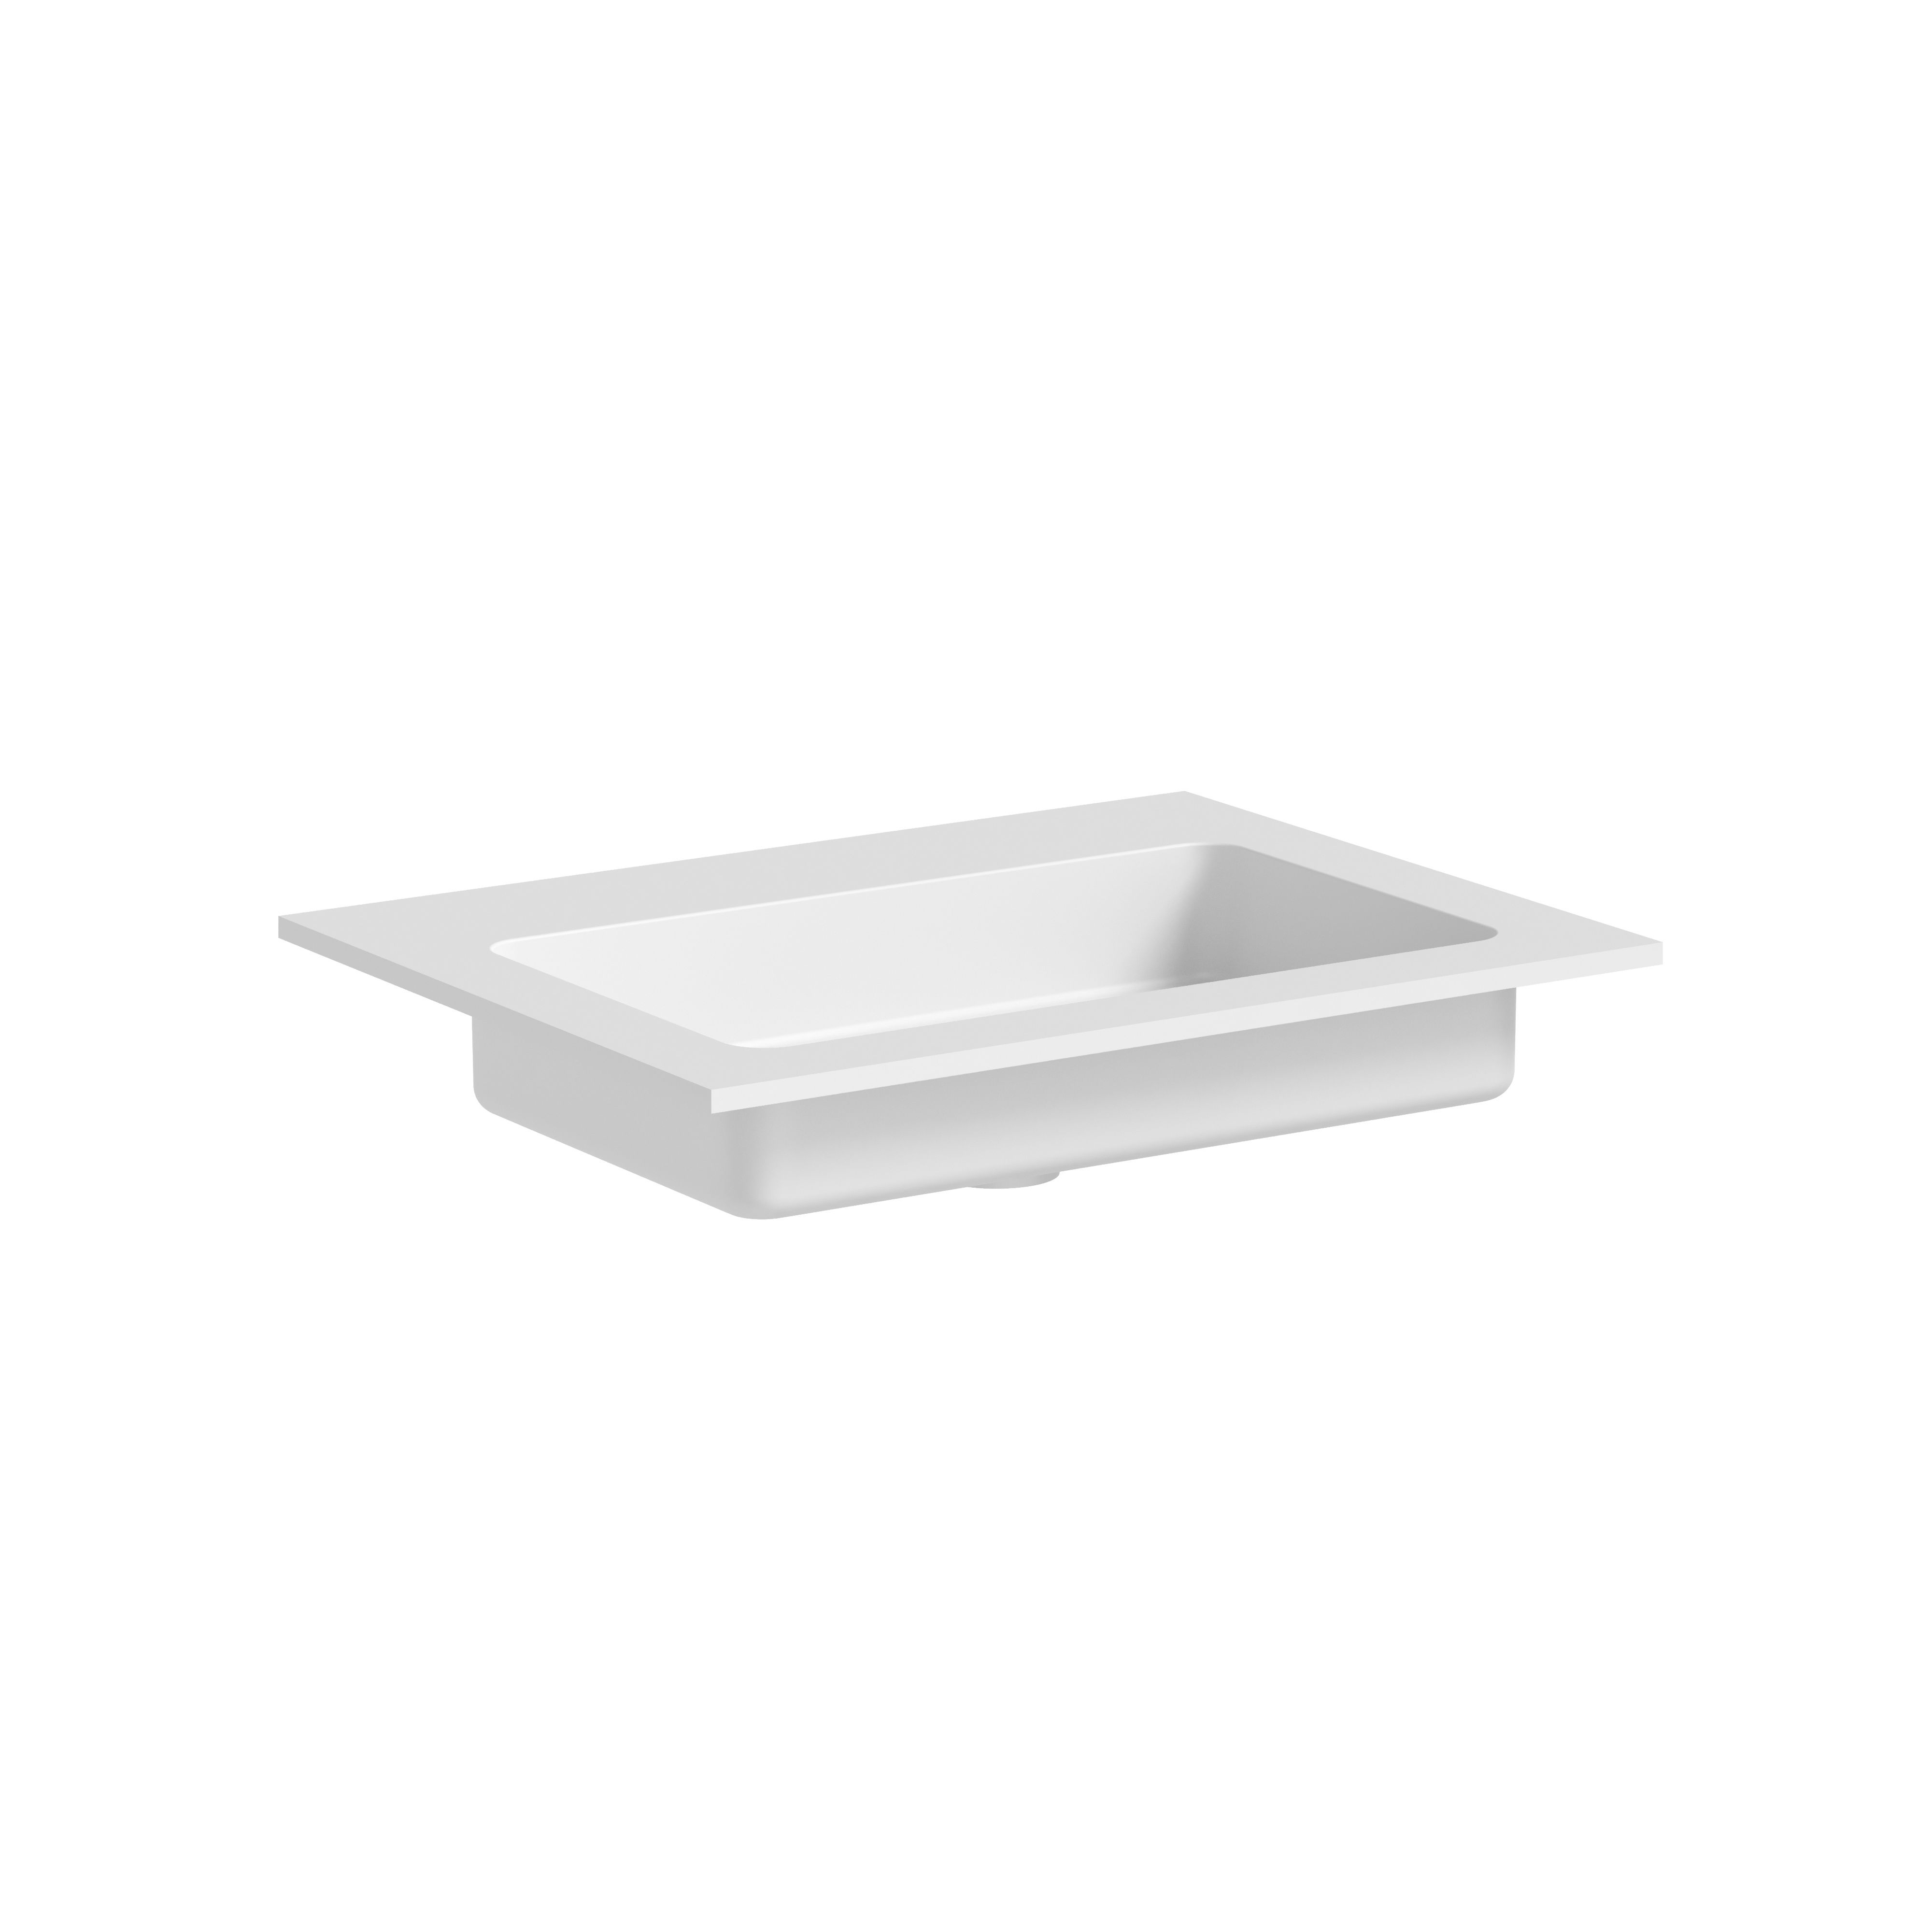 The Anara Solid Surface with Integrated Basin 610 x 460 x 12mm Matt White